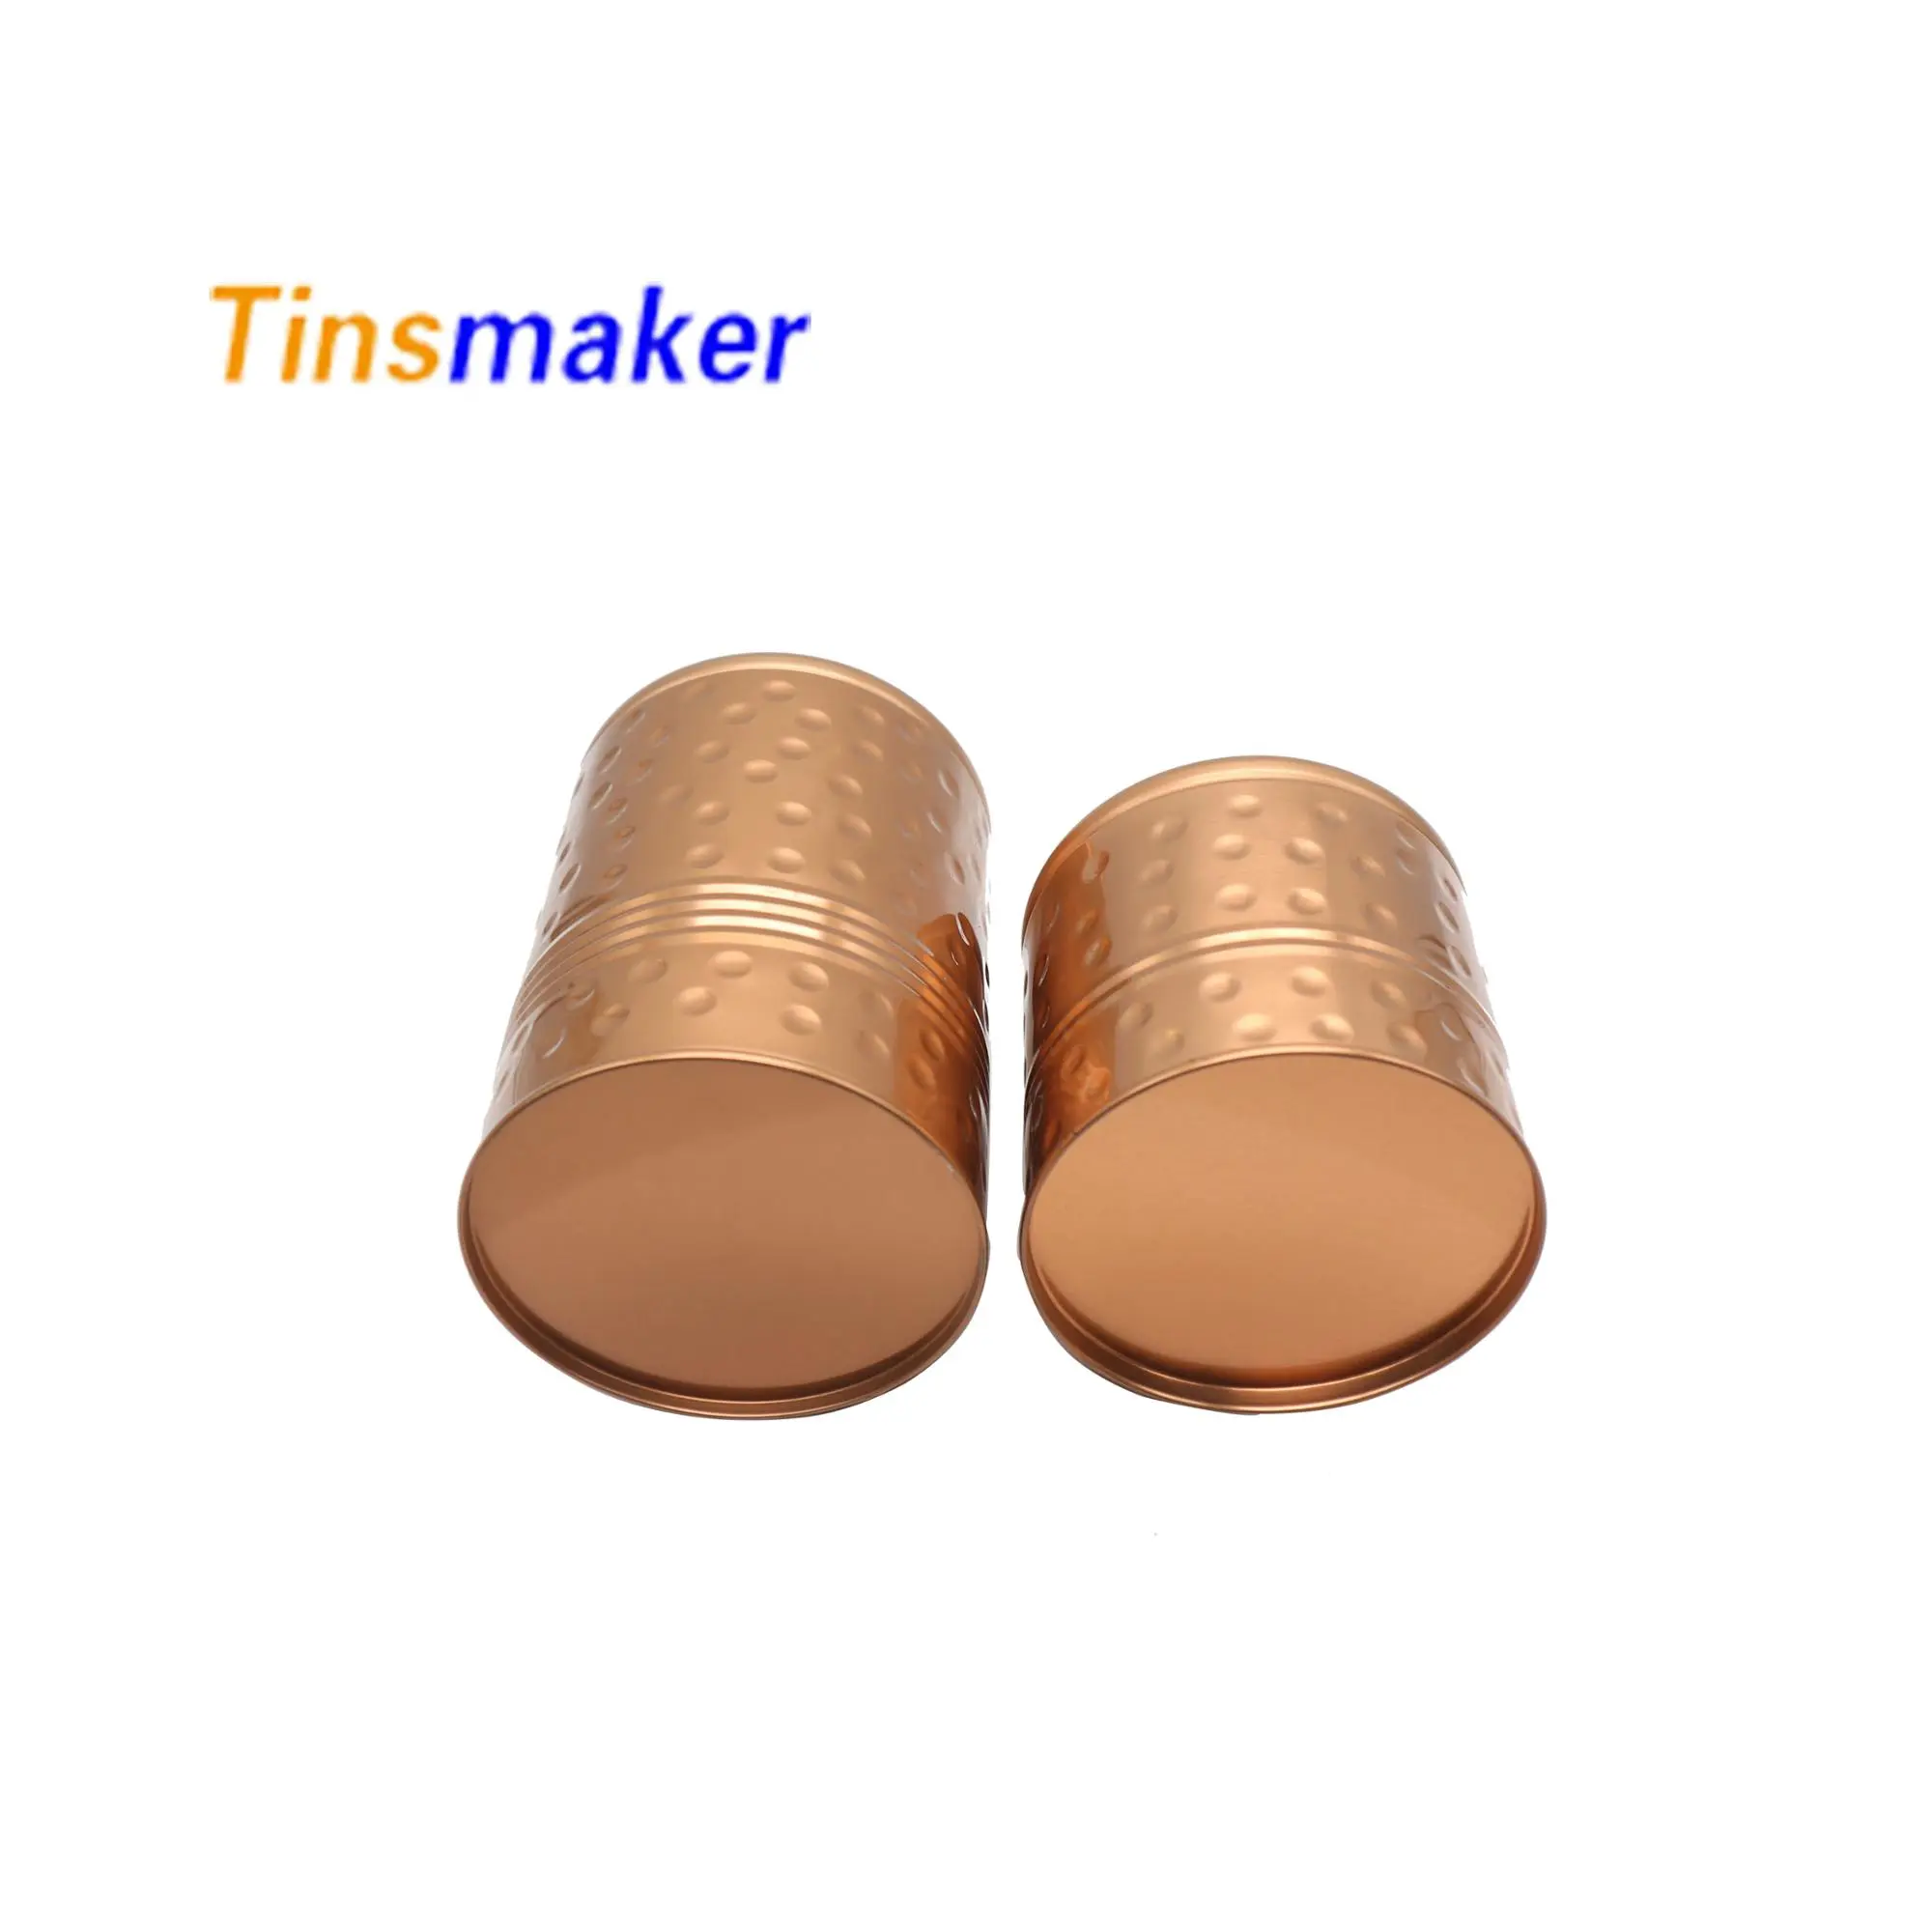 Tea Can Small Empty Packaging Coffee Round Containers Hot Sale Small Round Metal Food Packaging Tinplate Other Food 5000pcs